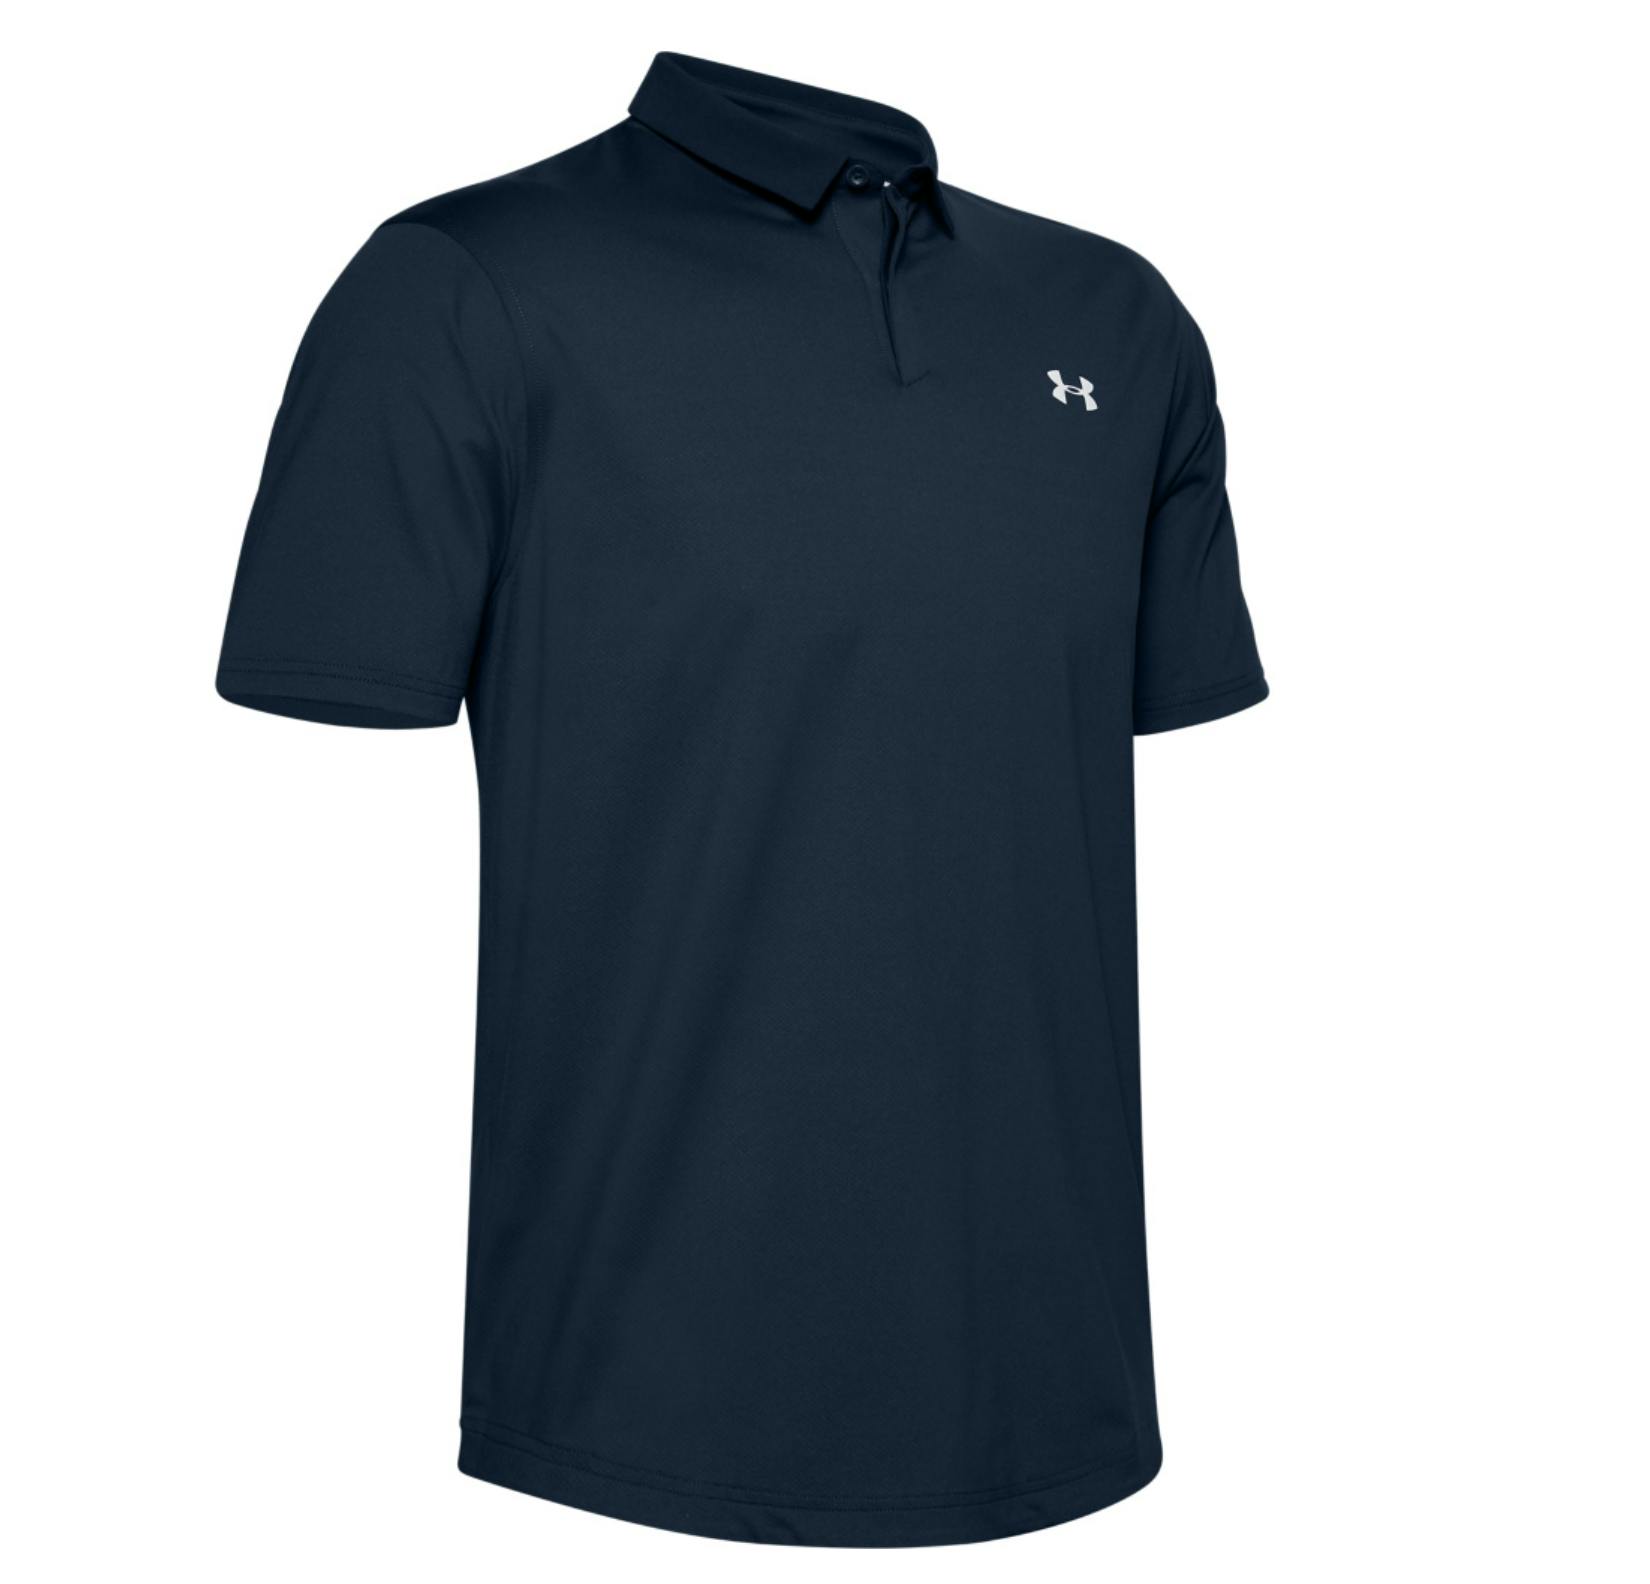 The Under Armour Men’s Iso-Chill Polo.